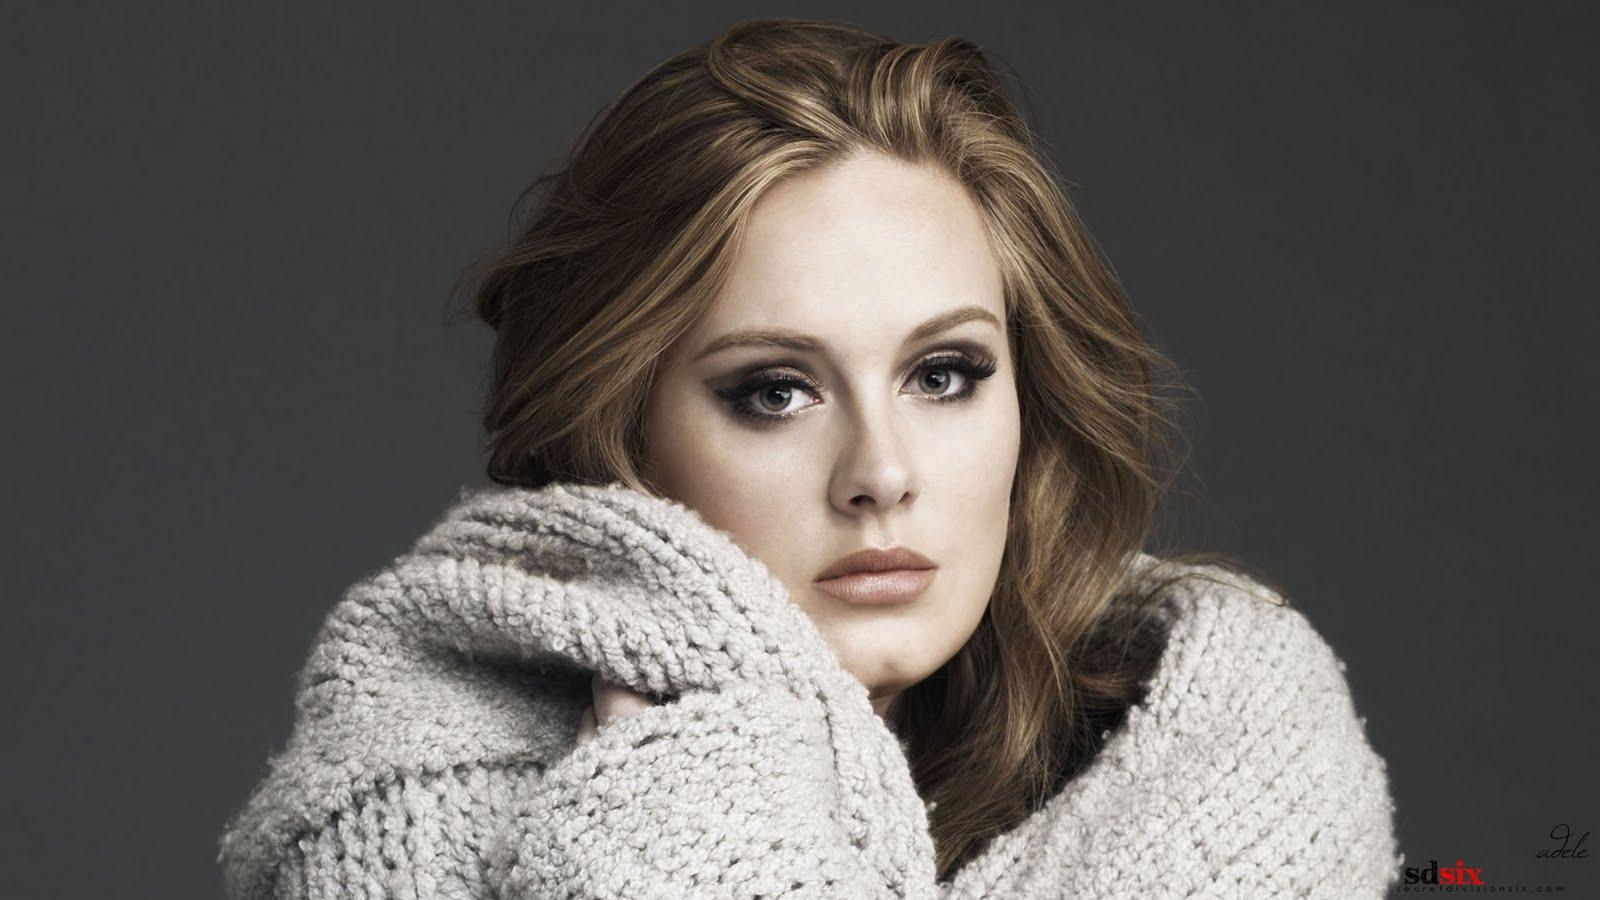 Adele Wallpaper for iPhone 6